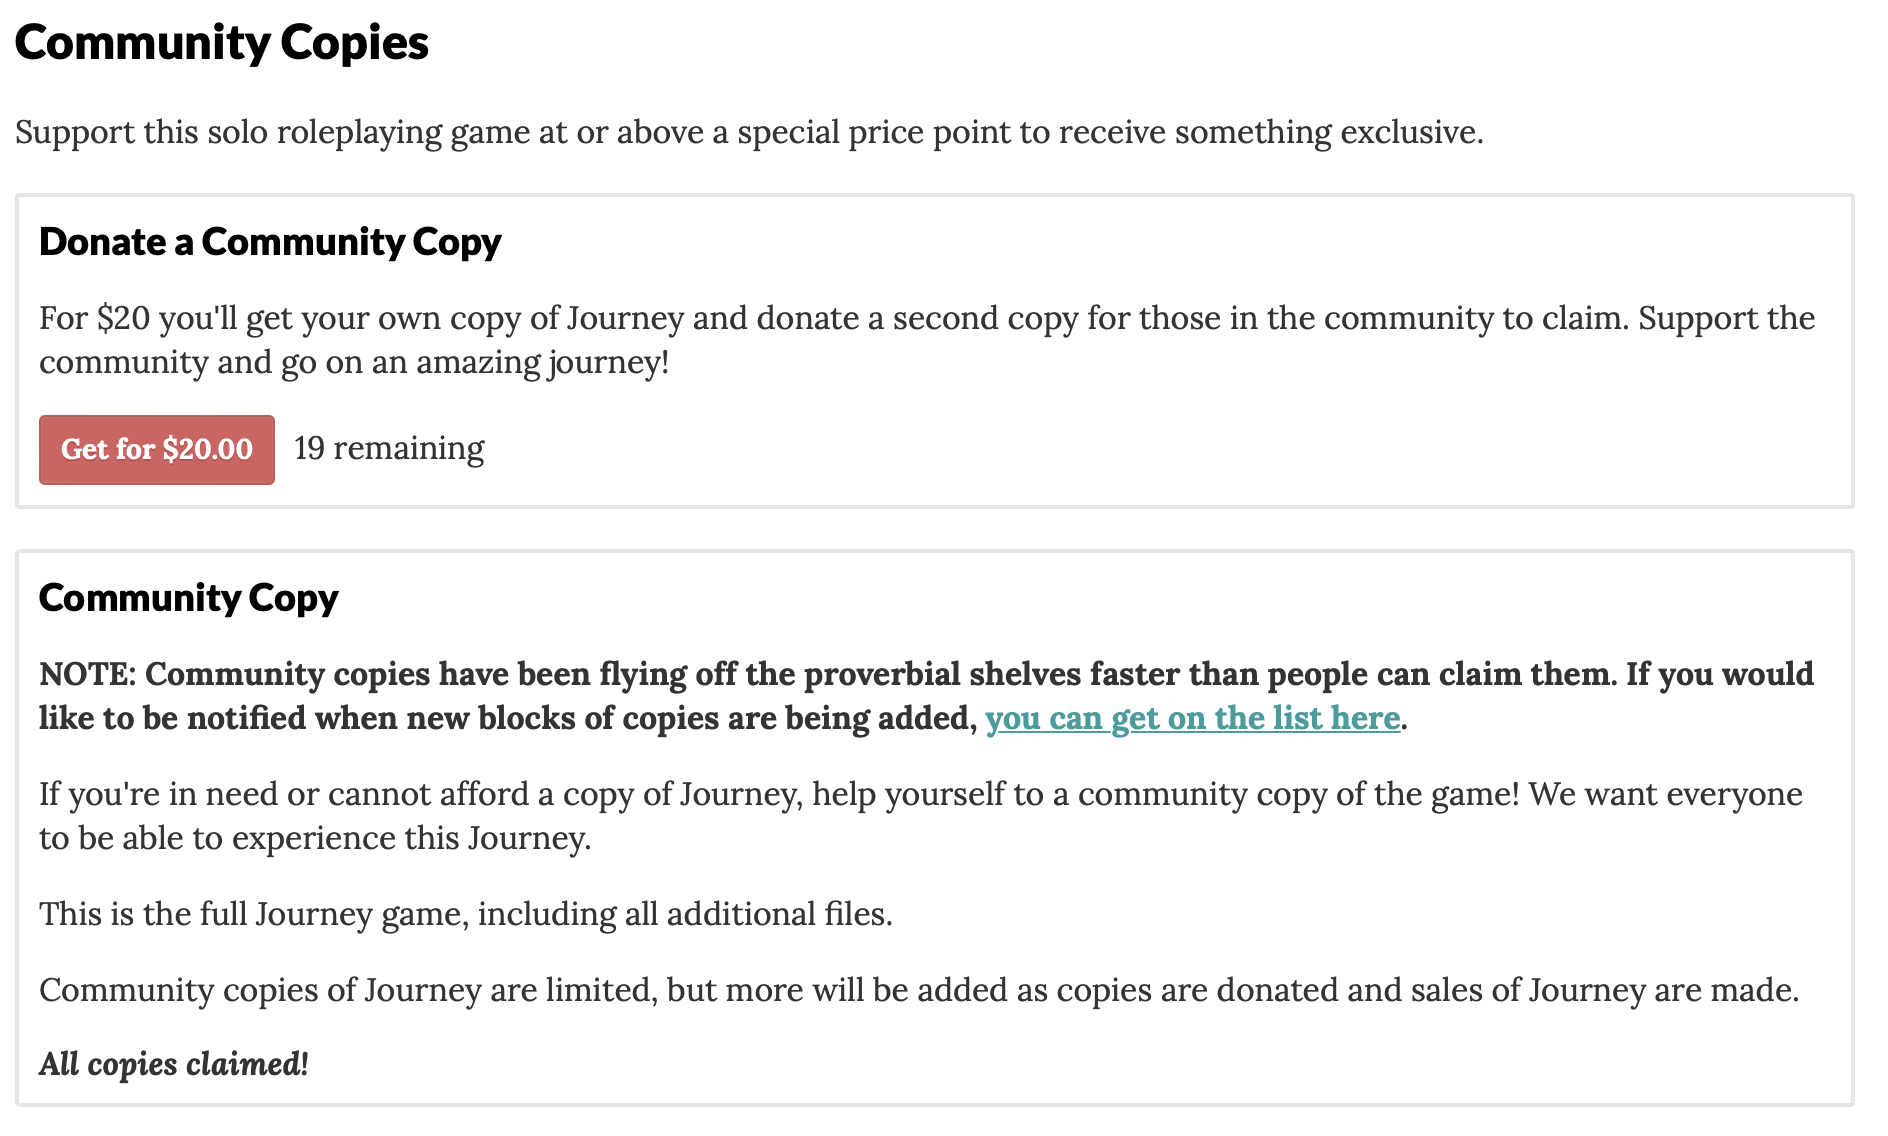 The Community Copies form on Itch.io for Journey by Graycastle Press